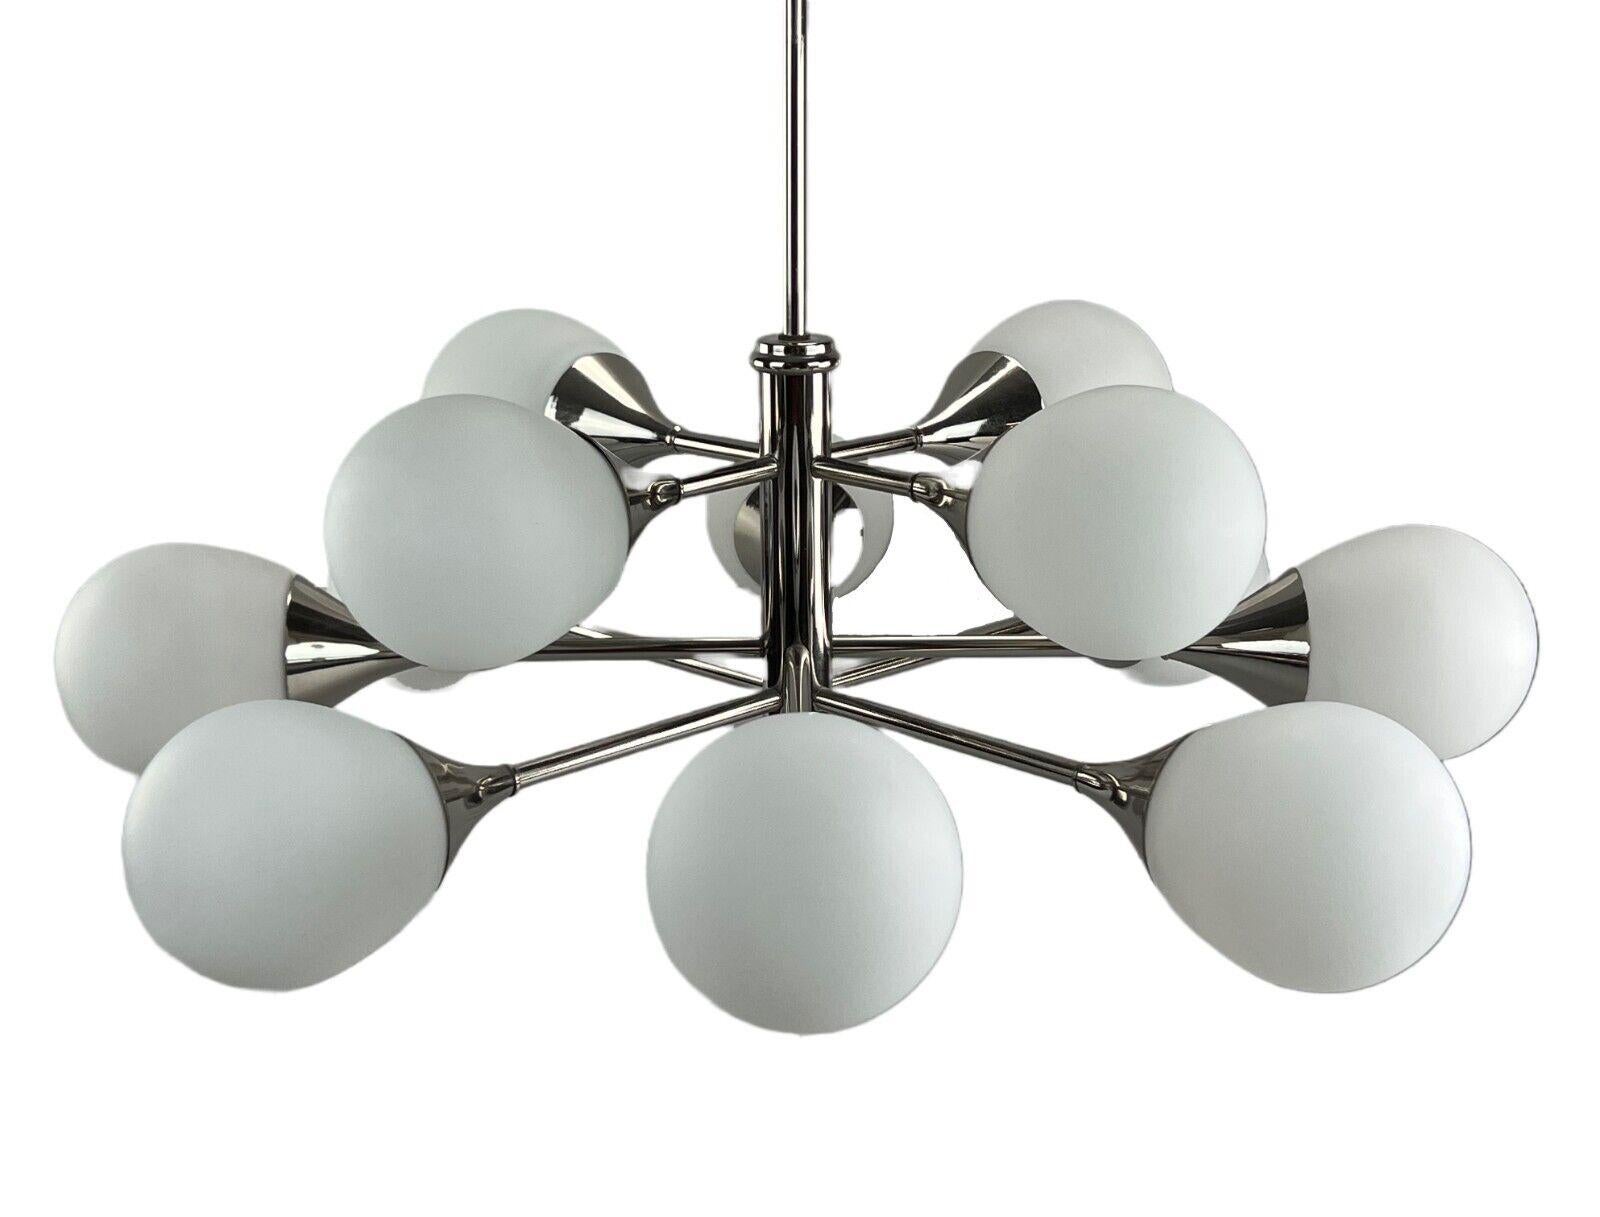 12-flame Sputnik chandelier from the 1960s and 1970s, Kaiser Leuchten, opal glass design

Object: ceiling lamp

Manufacturer: Kaiser lights

Condition: good

Age: around 1960-1970

Dimensions:

Diameter = 62.5cm
Height = 56cm

Other